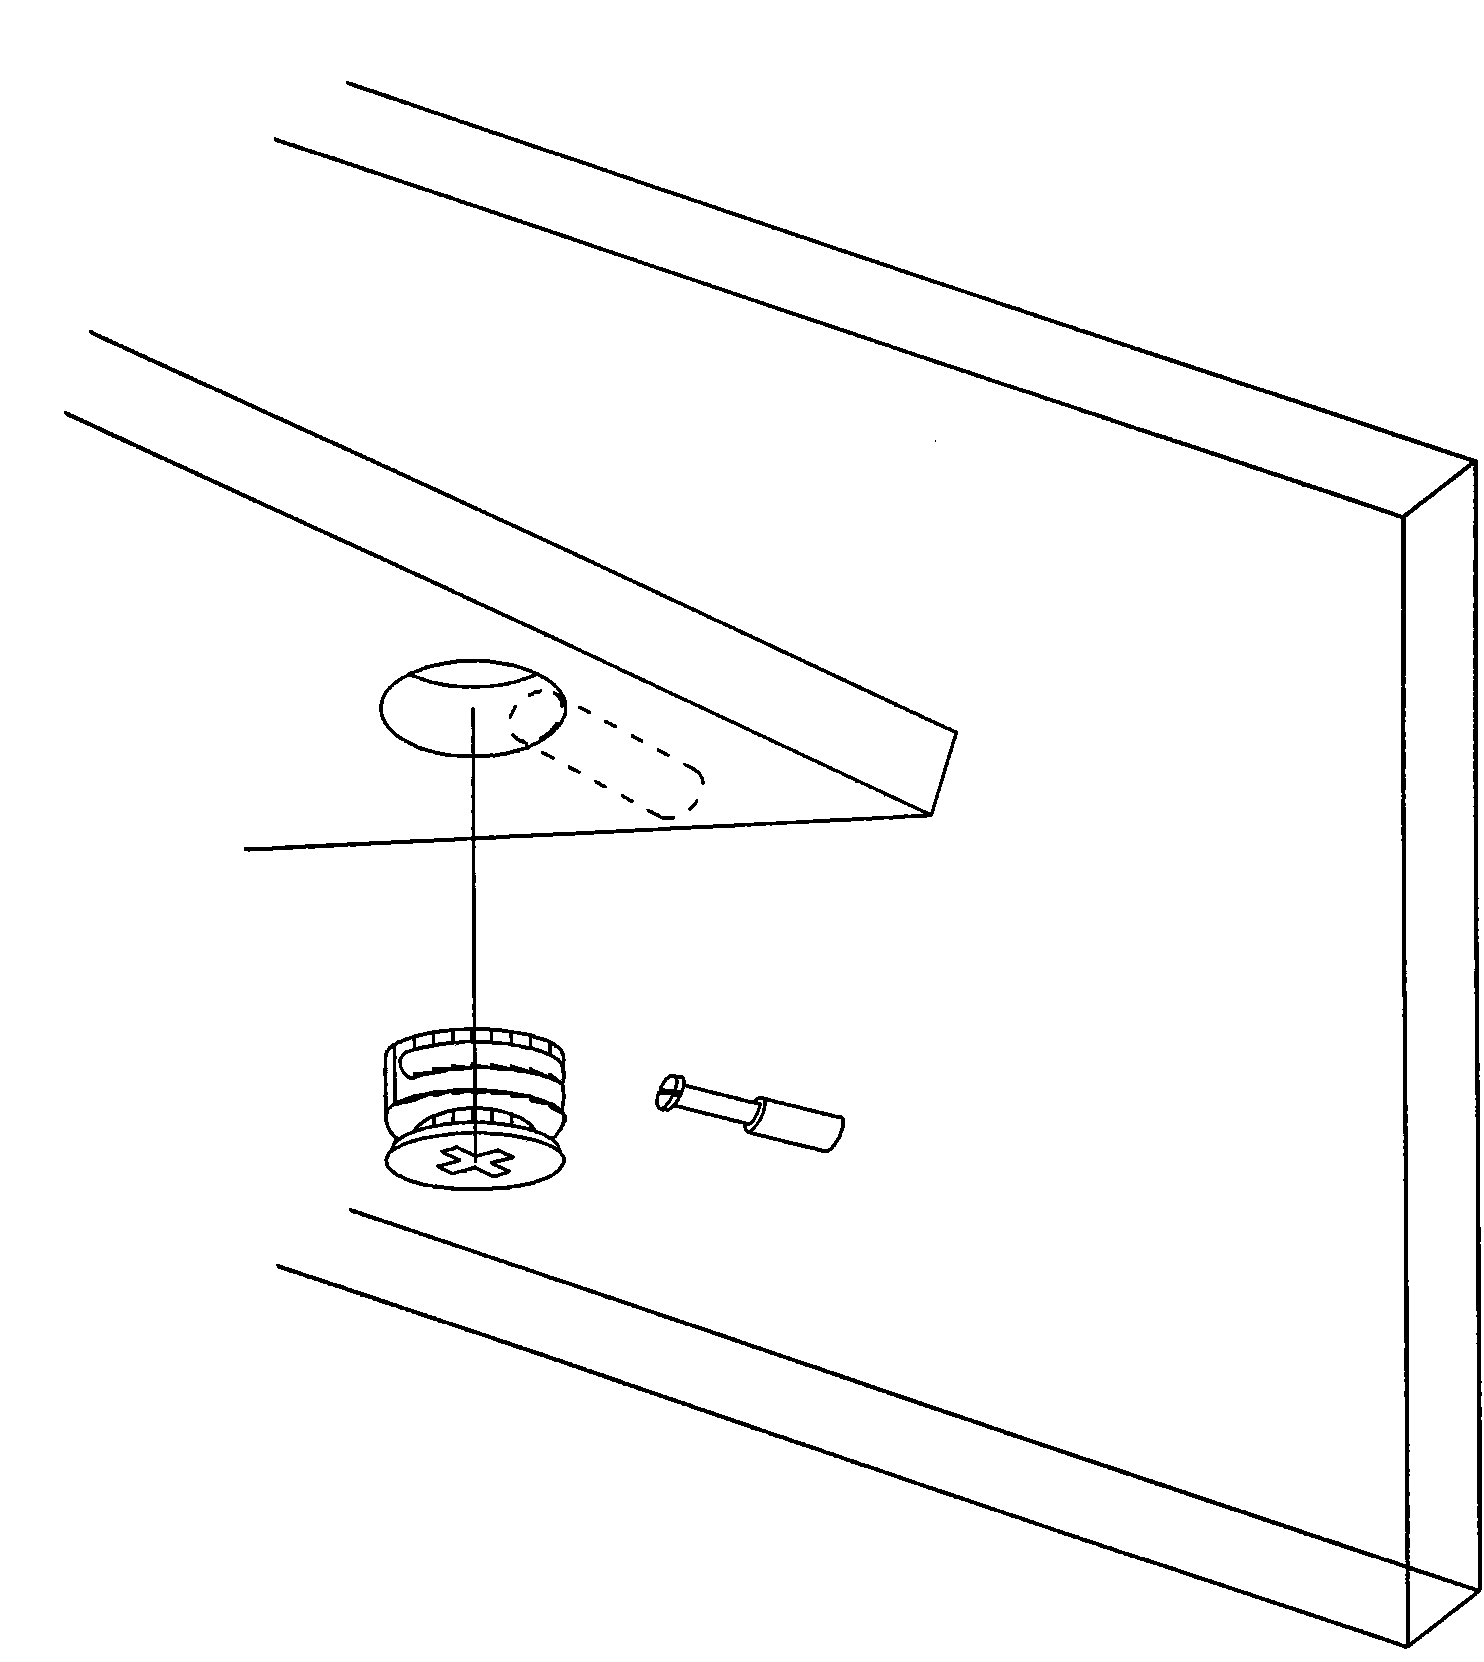 Connection fitting of family product